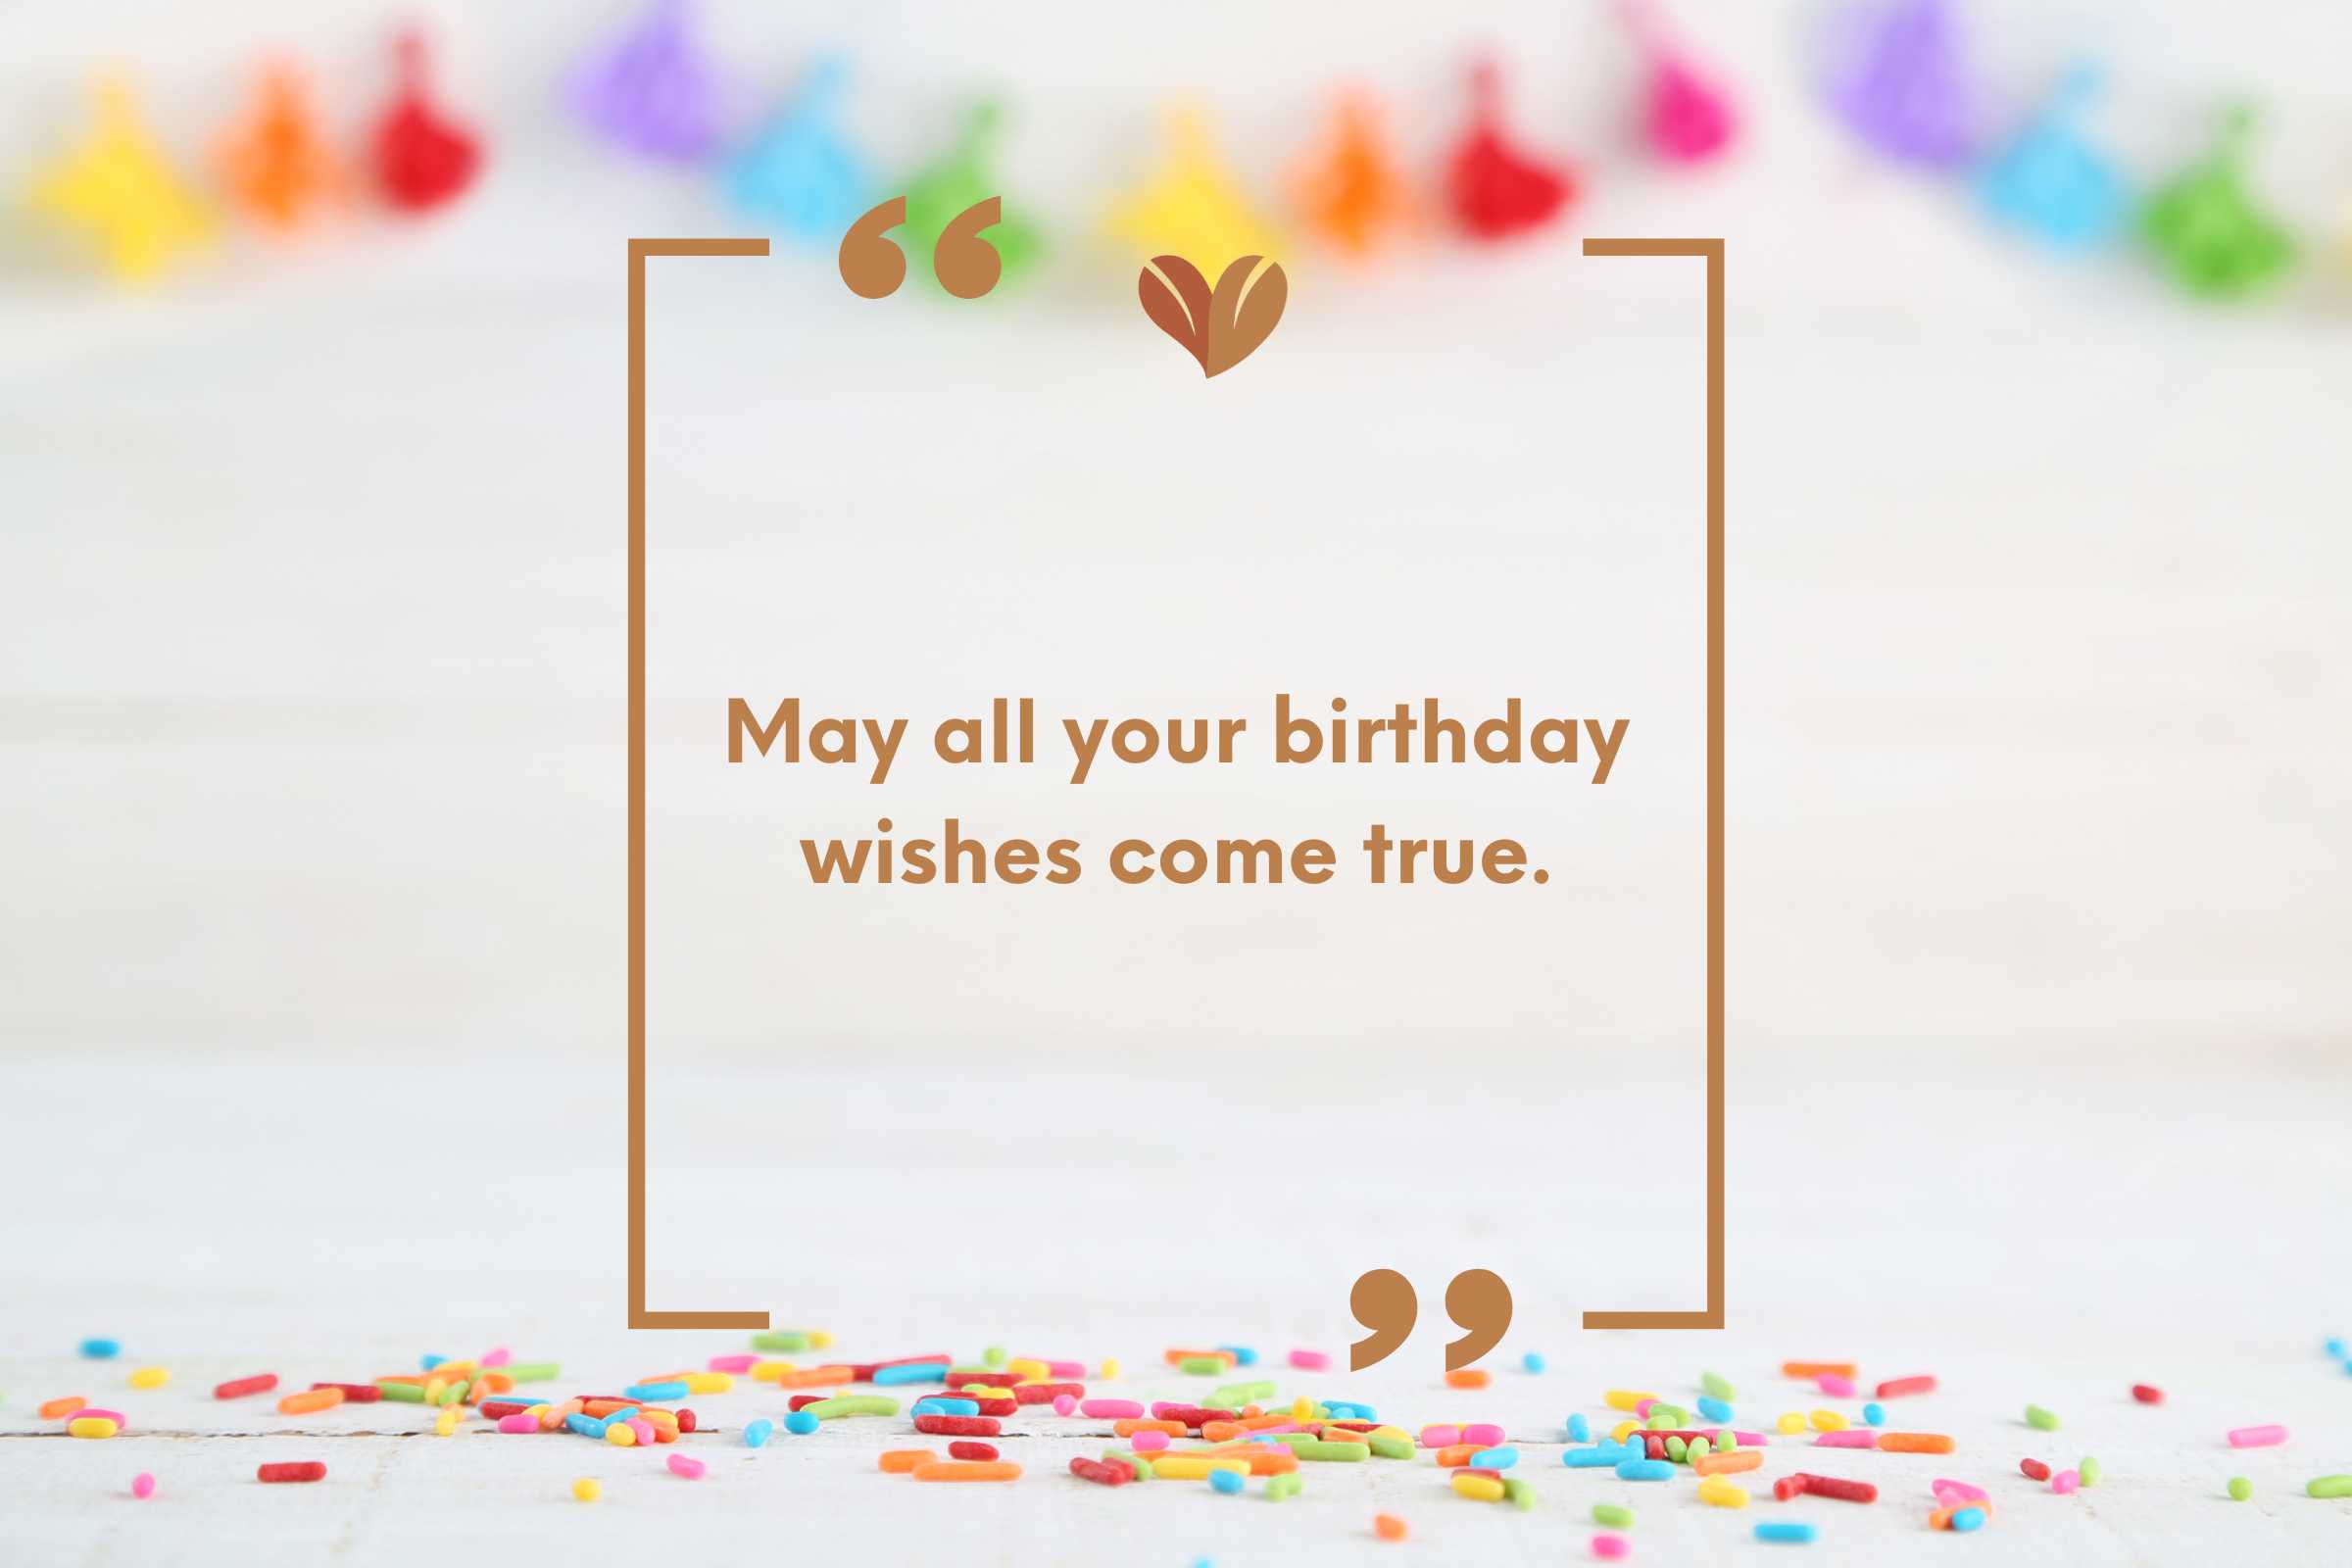 Wishing you a year of dreams come true: Birthday quotes for mother-in-law